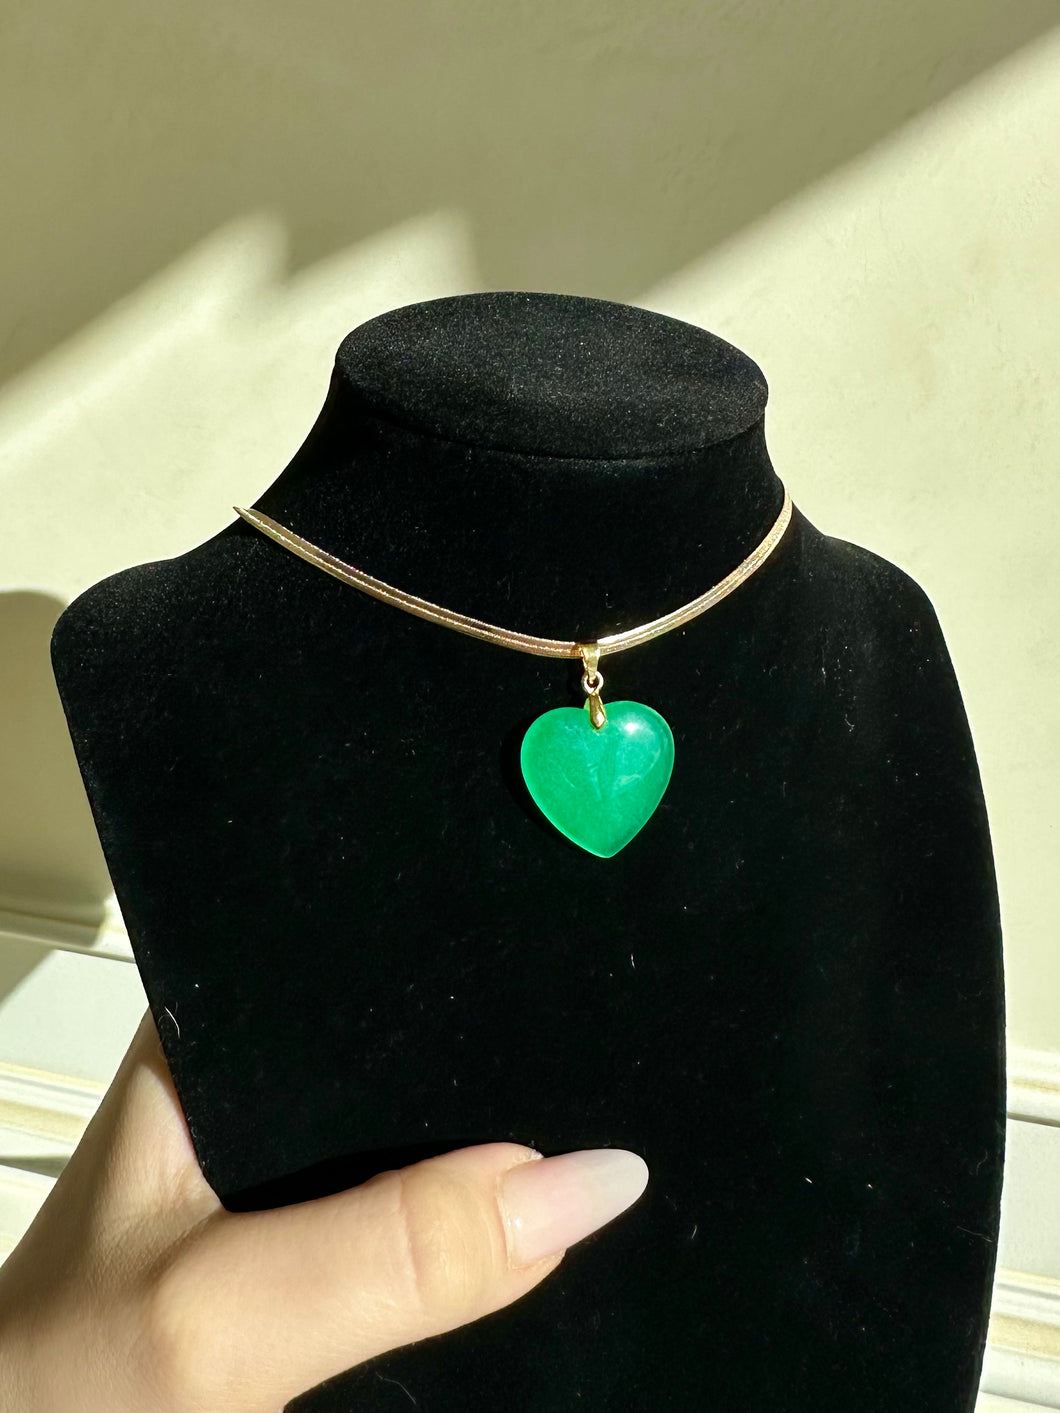 The Jade Heart Necklace